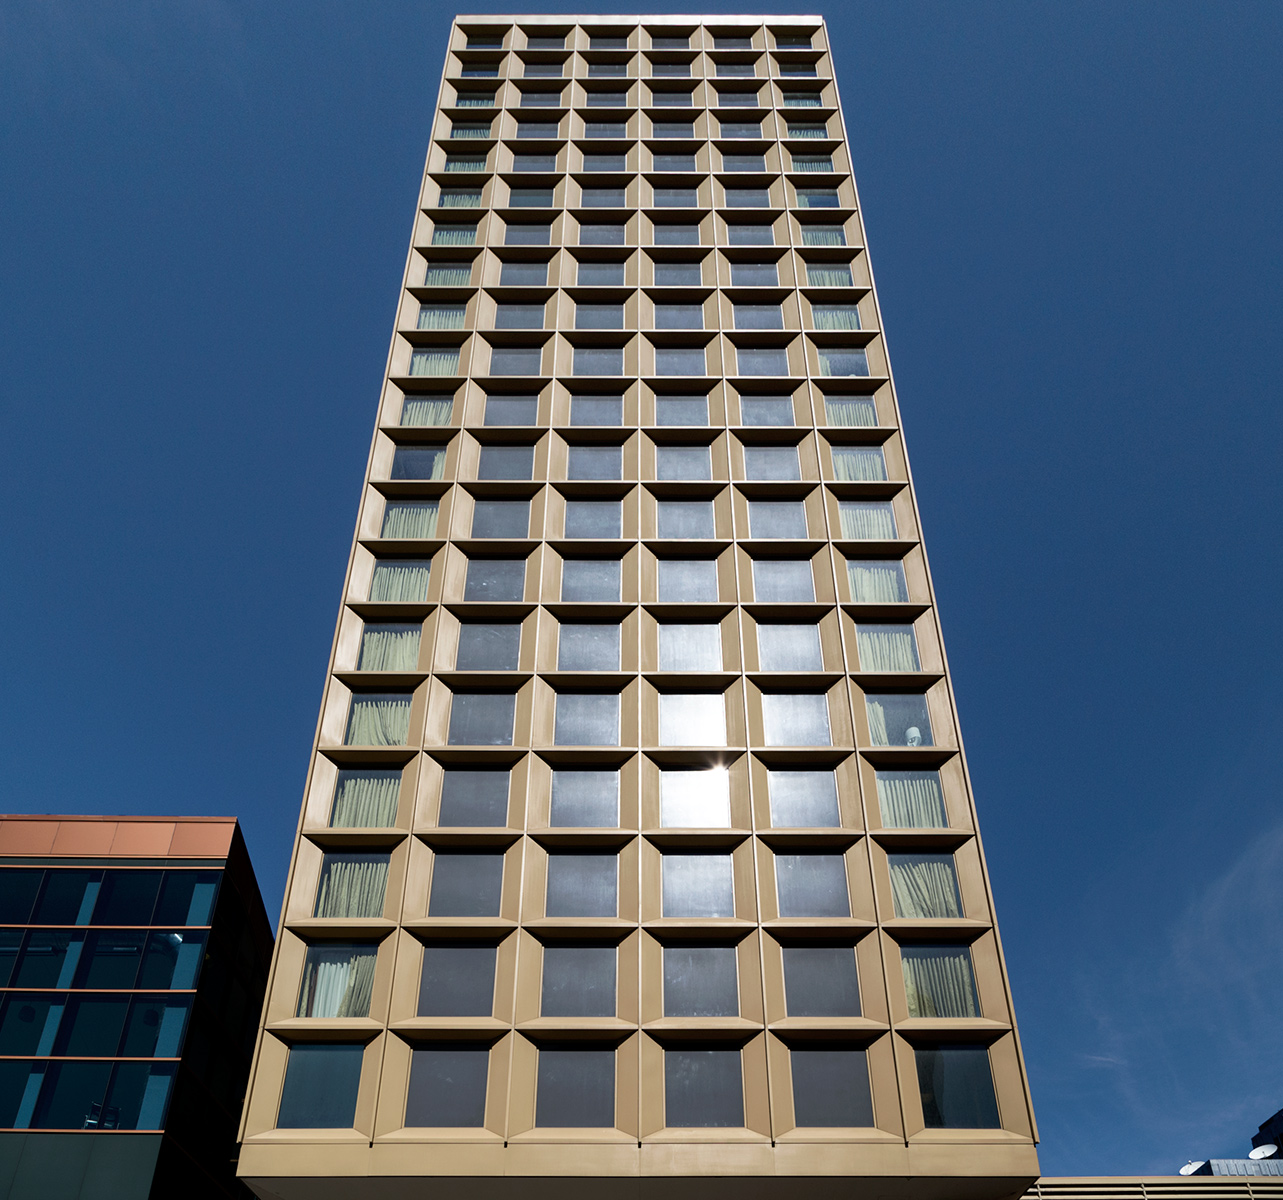 20160327. Looking up Pittsburgh's 1959-built Wyndham Grand Hotel